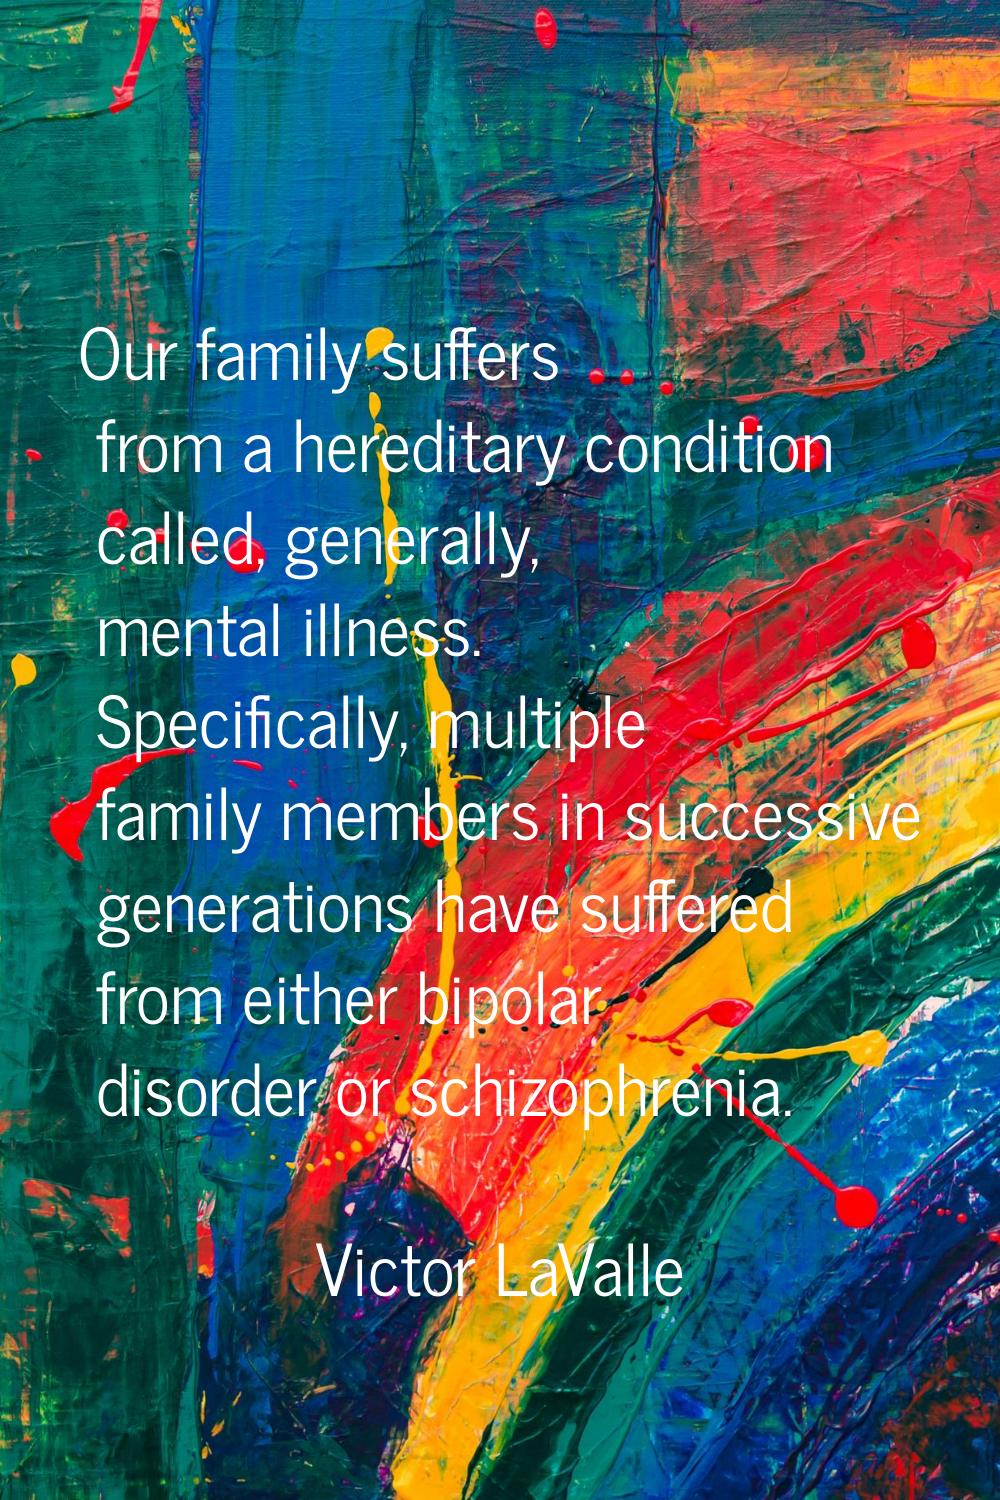 Our family suffers from a hereditary condition called, generally, mental illness. Specifically, mul